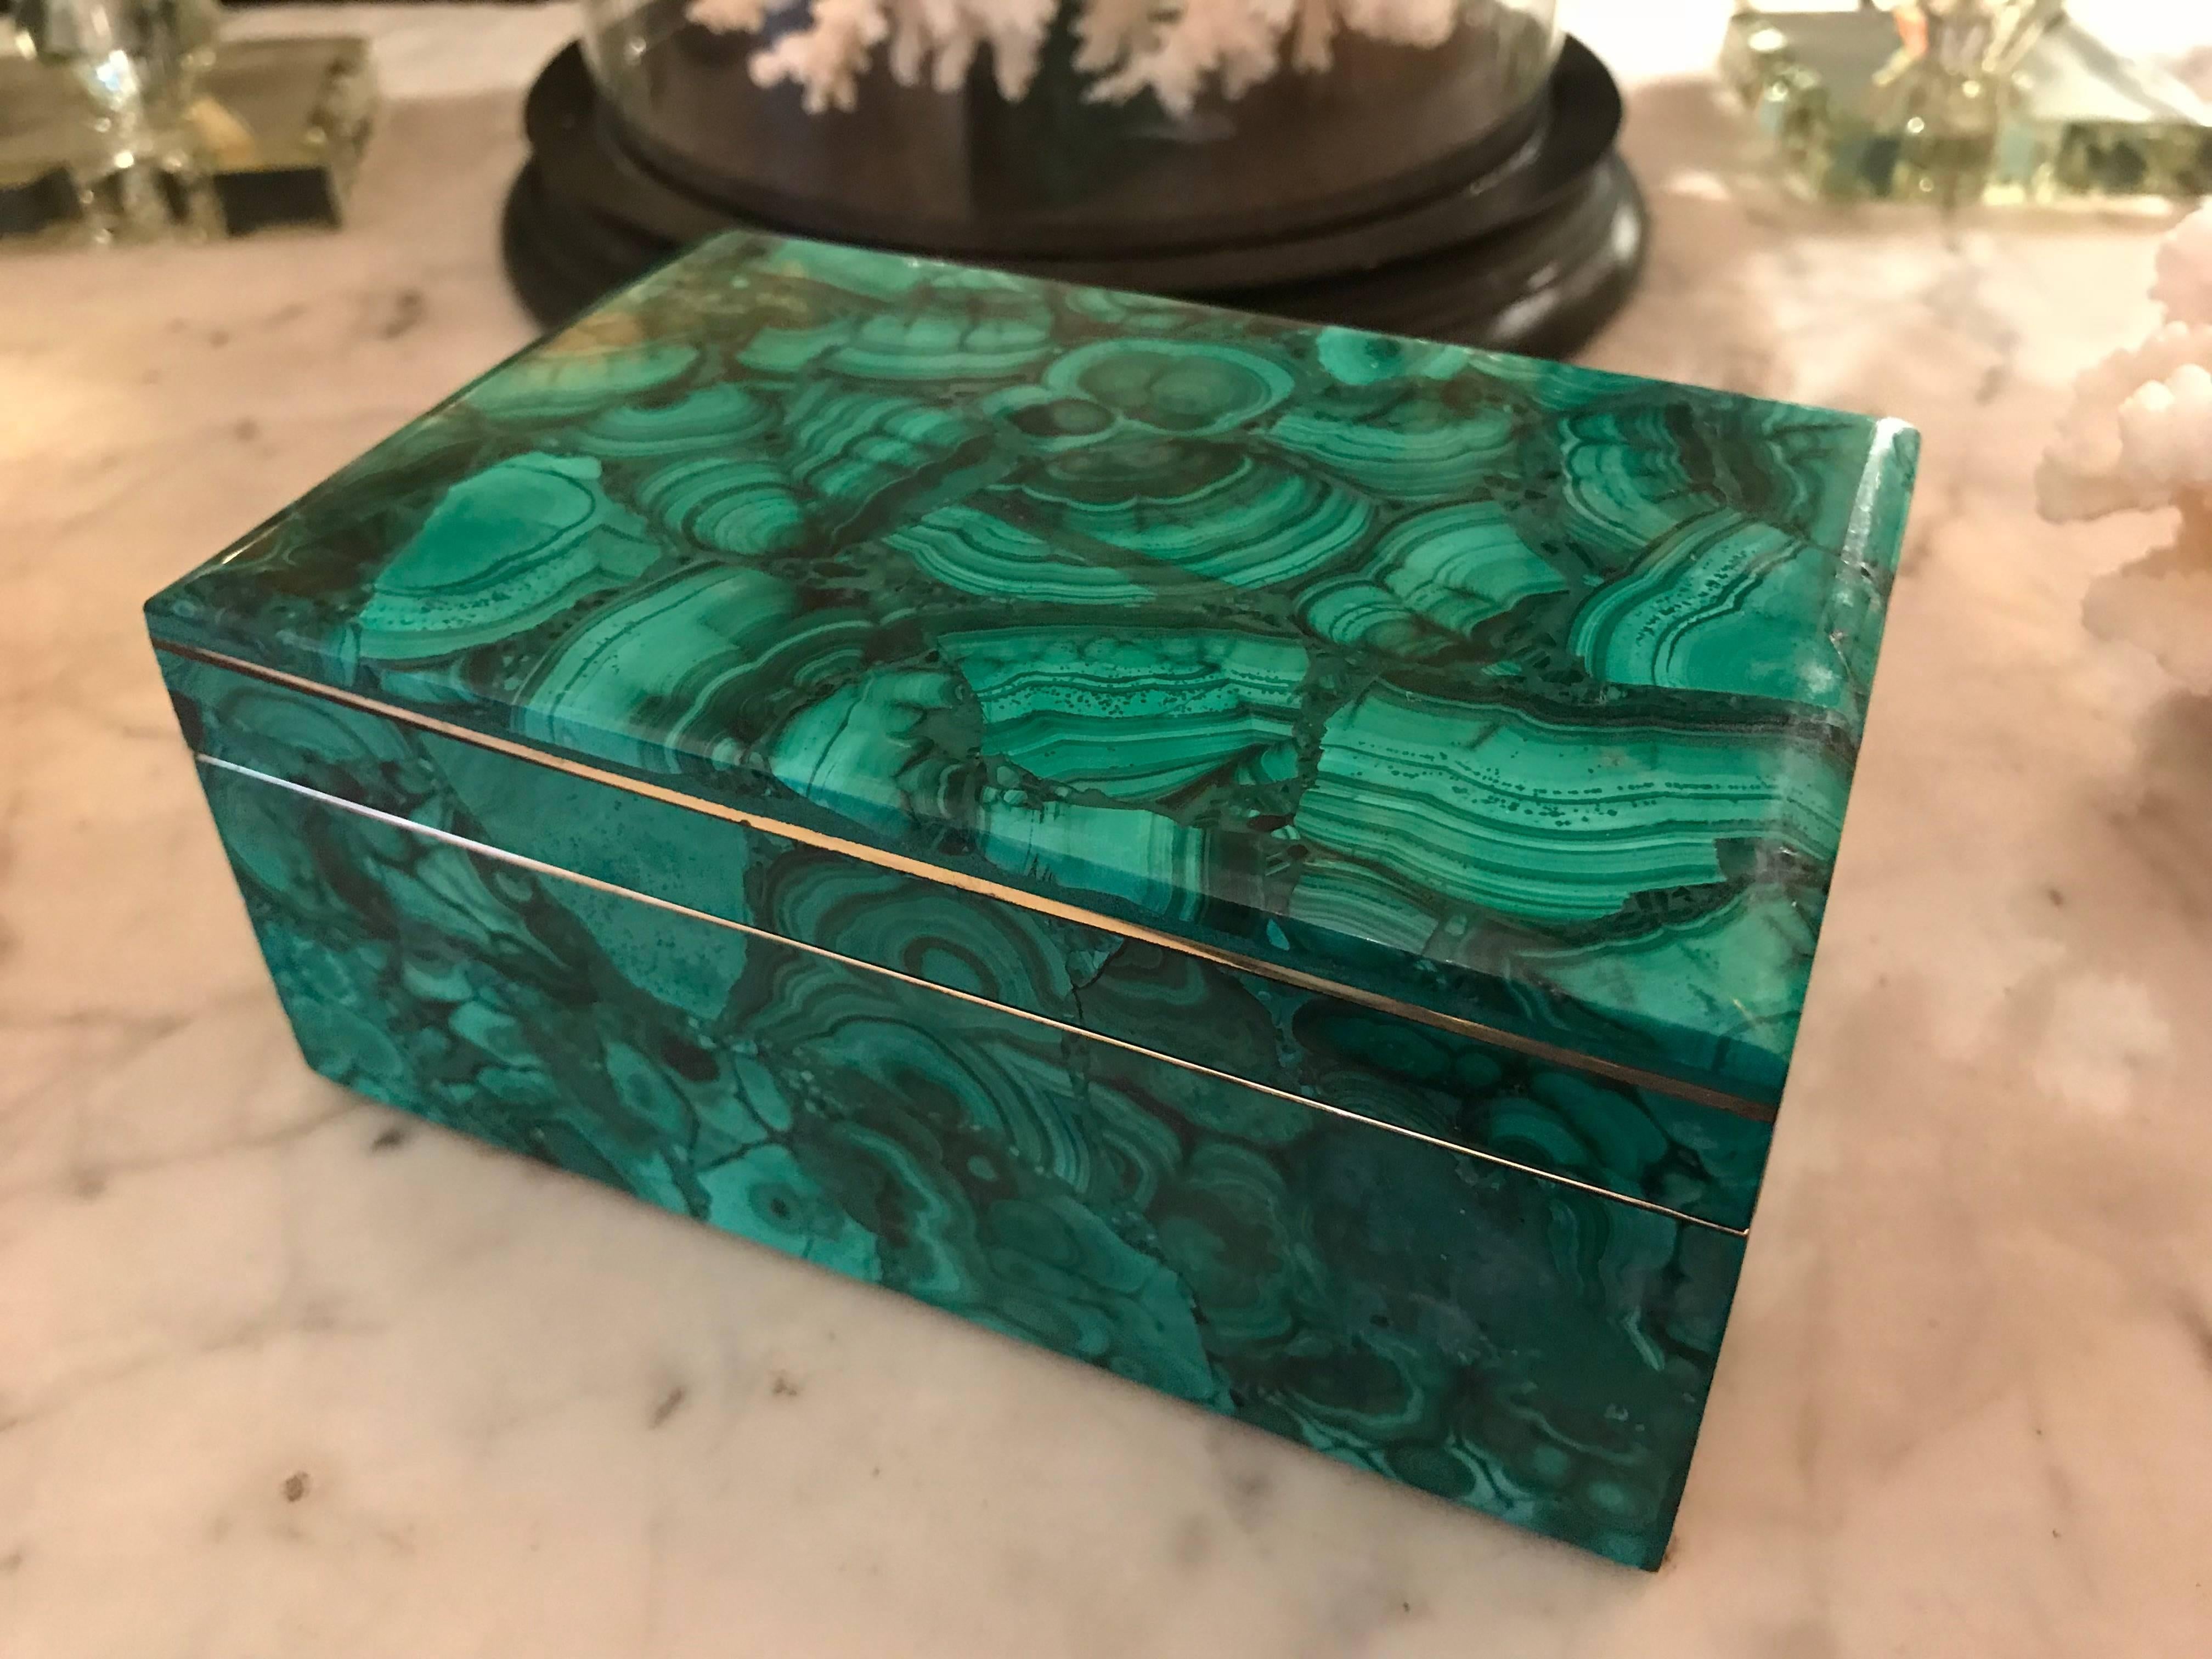 A beautiful malachite jewelry box with brass trim inlaid on the lid and around the base top. A beautifully quality vintage piece from the 1930s.